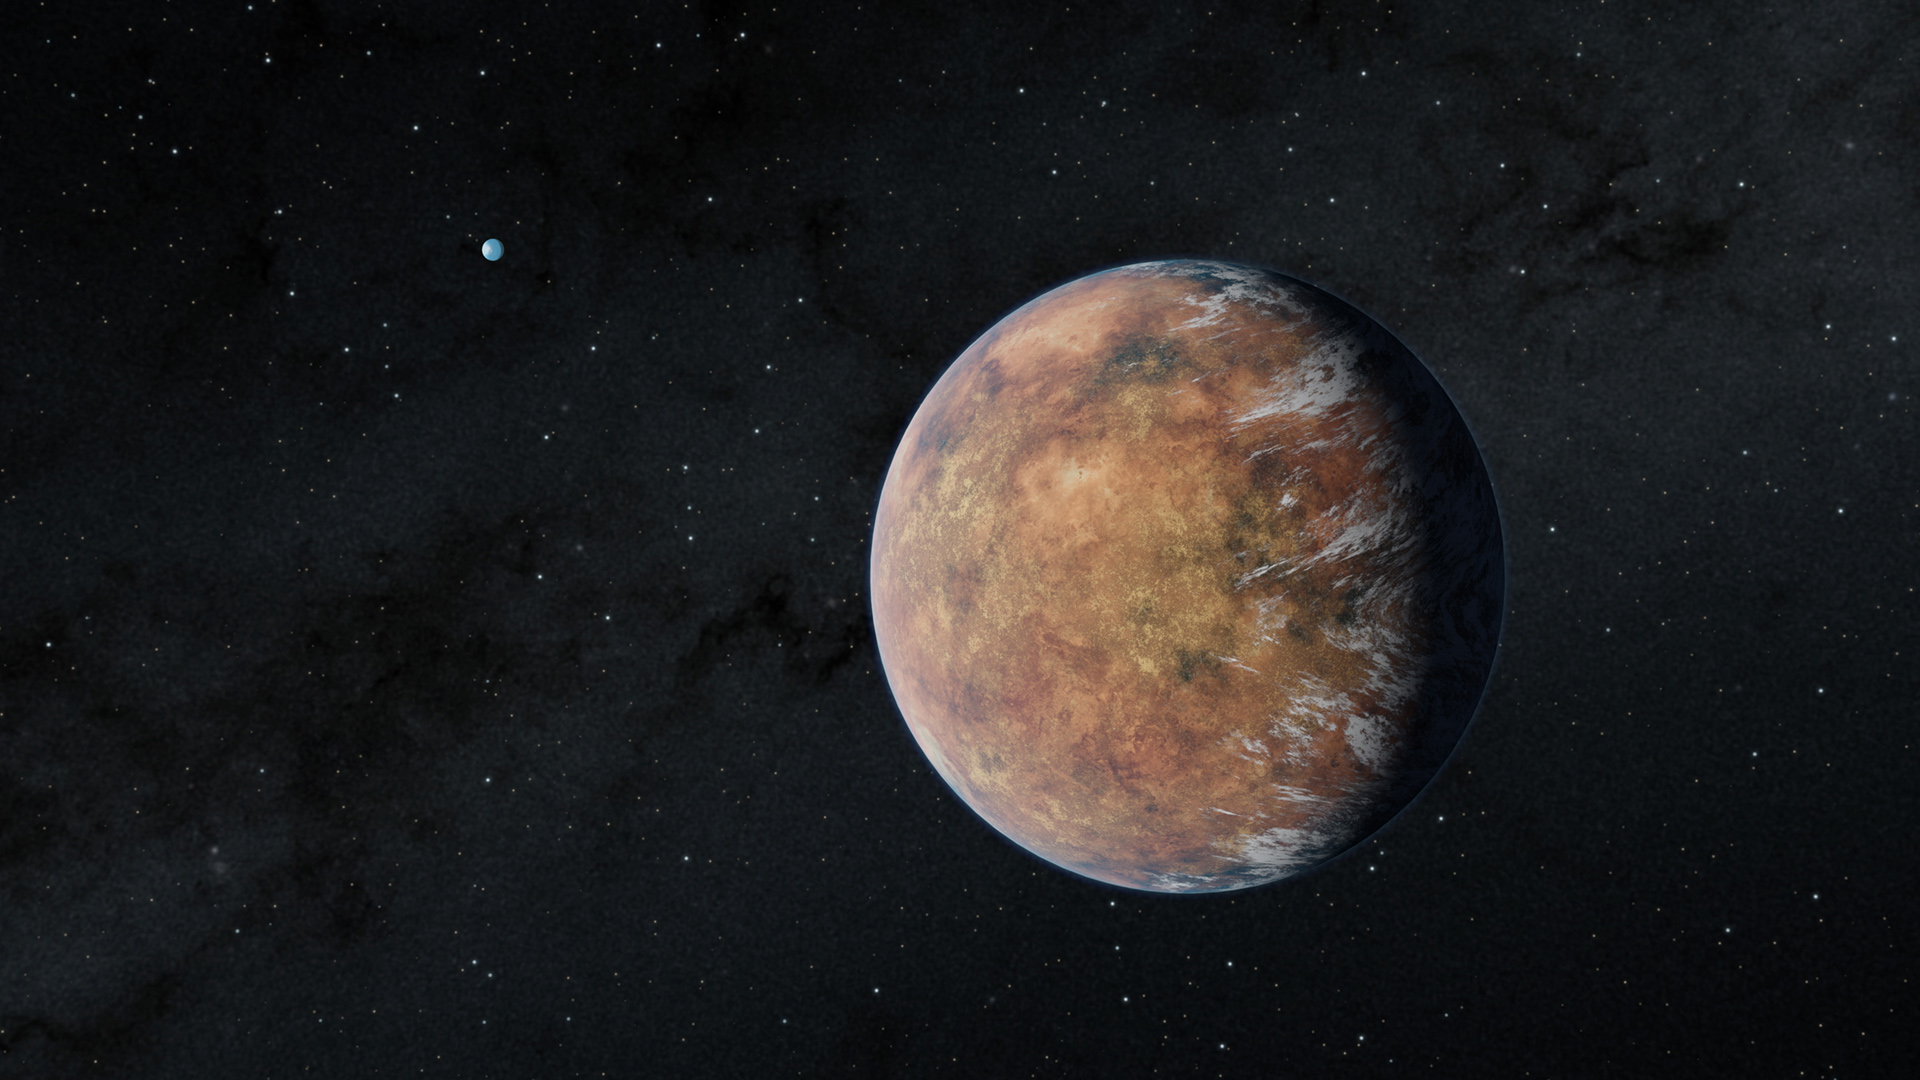 An illustration shows what the newly discovered planet TOI-700 e may look like — a brown, rocky orb sitting against the black of space. That black background is dotted with stars and a small blue sphere in the distance representing planet TOI-700 d.